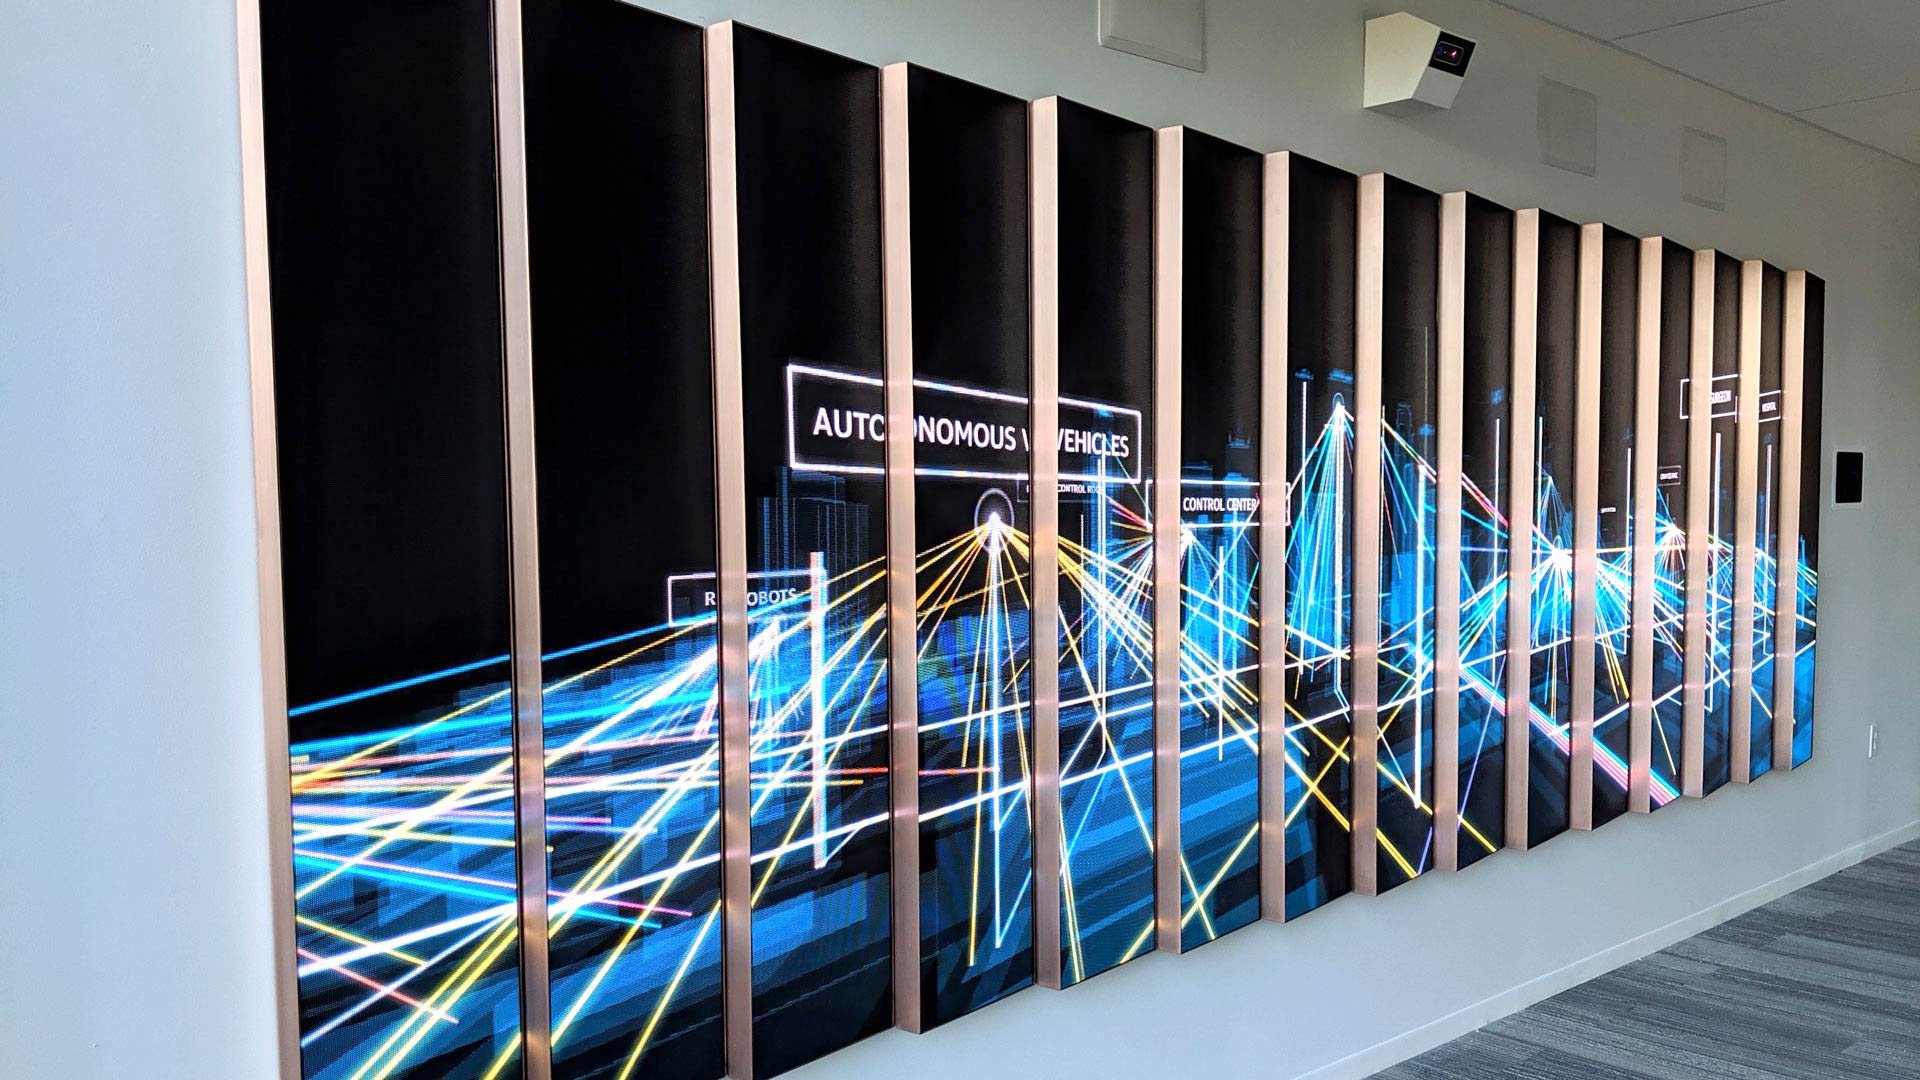 The display is built from staggered LED panels, creating a unique sense of three-dimensionality.